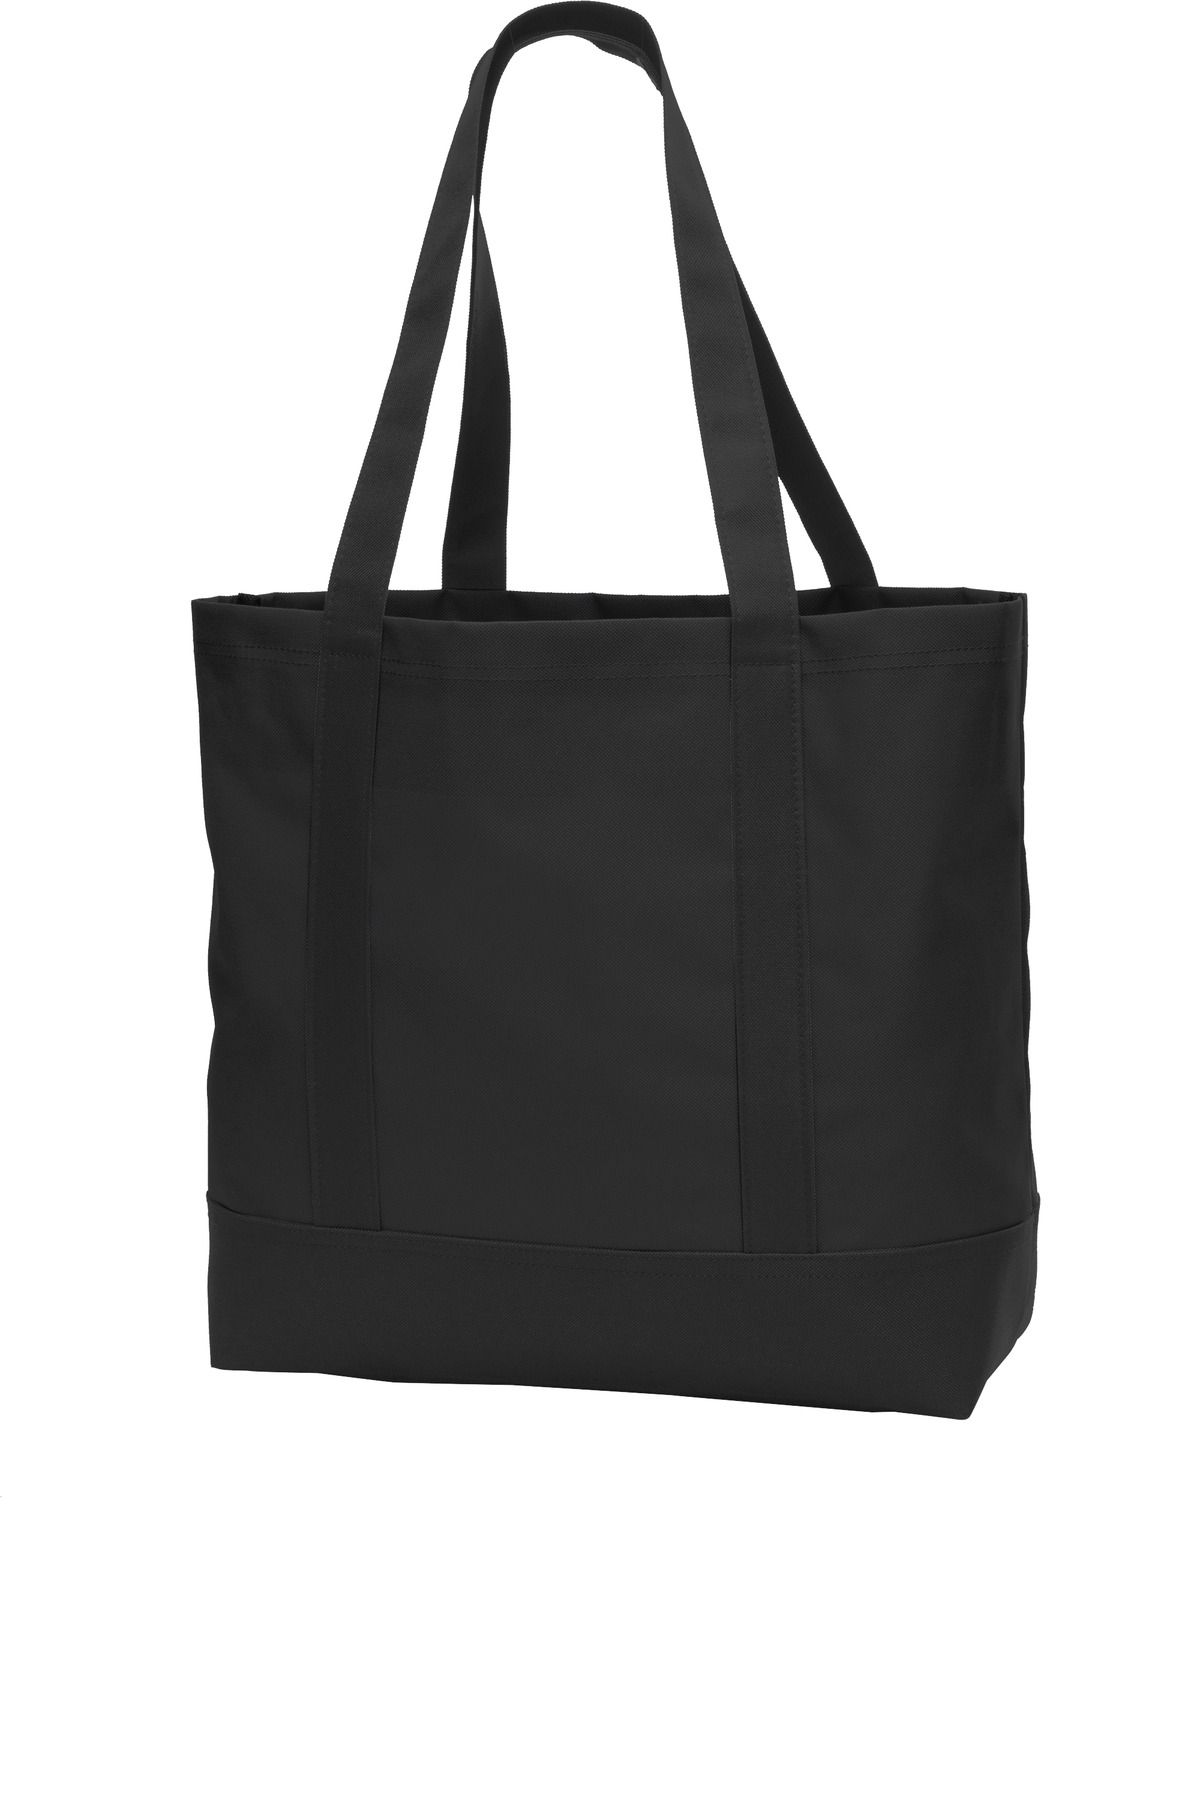 Port Authority Hospitality Bags ® Day Tote.-Port Authority